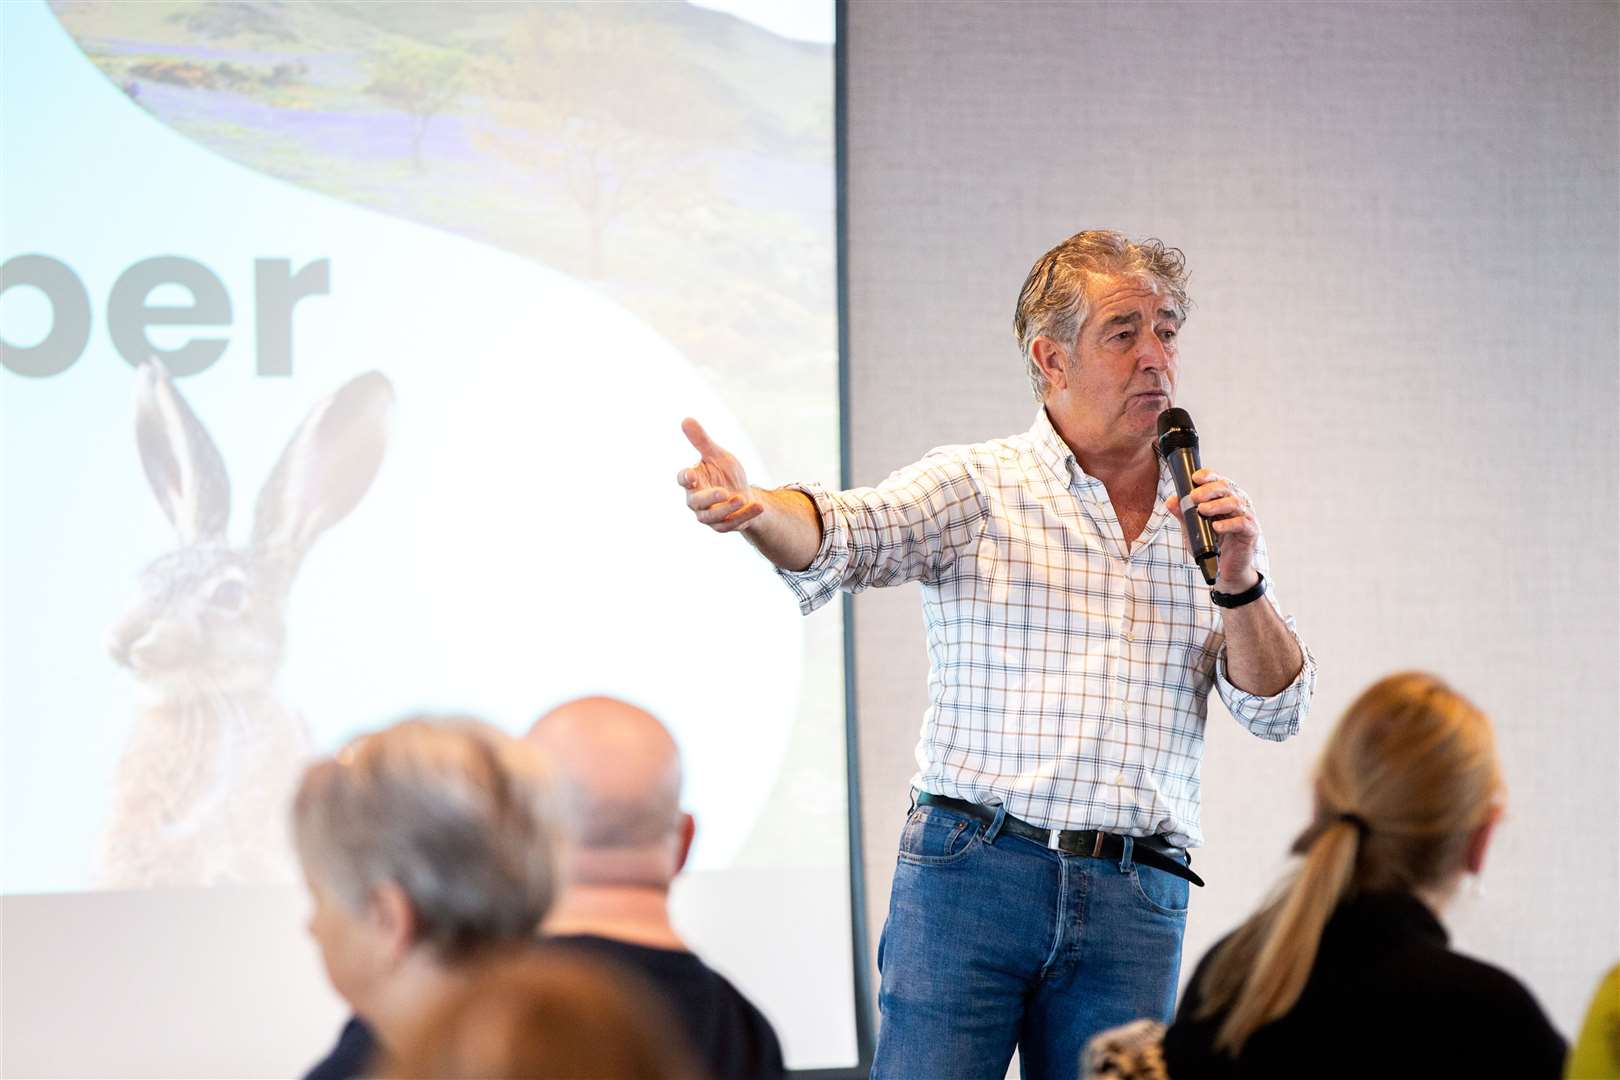 Tony Juniper, chair of Natural England, contributed to assembly by offering his expertise (Involve/Jemima Stubbs/PA)